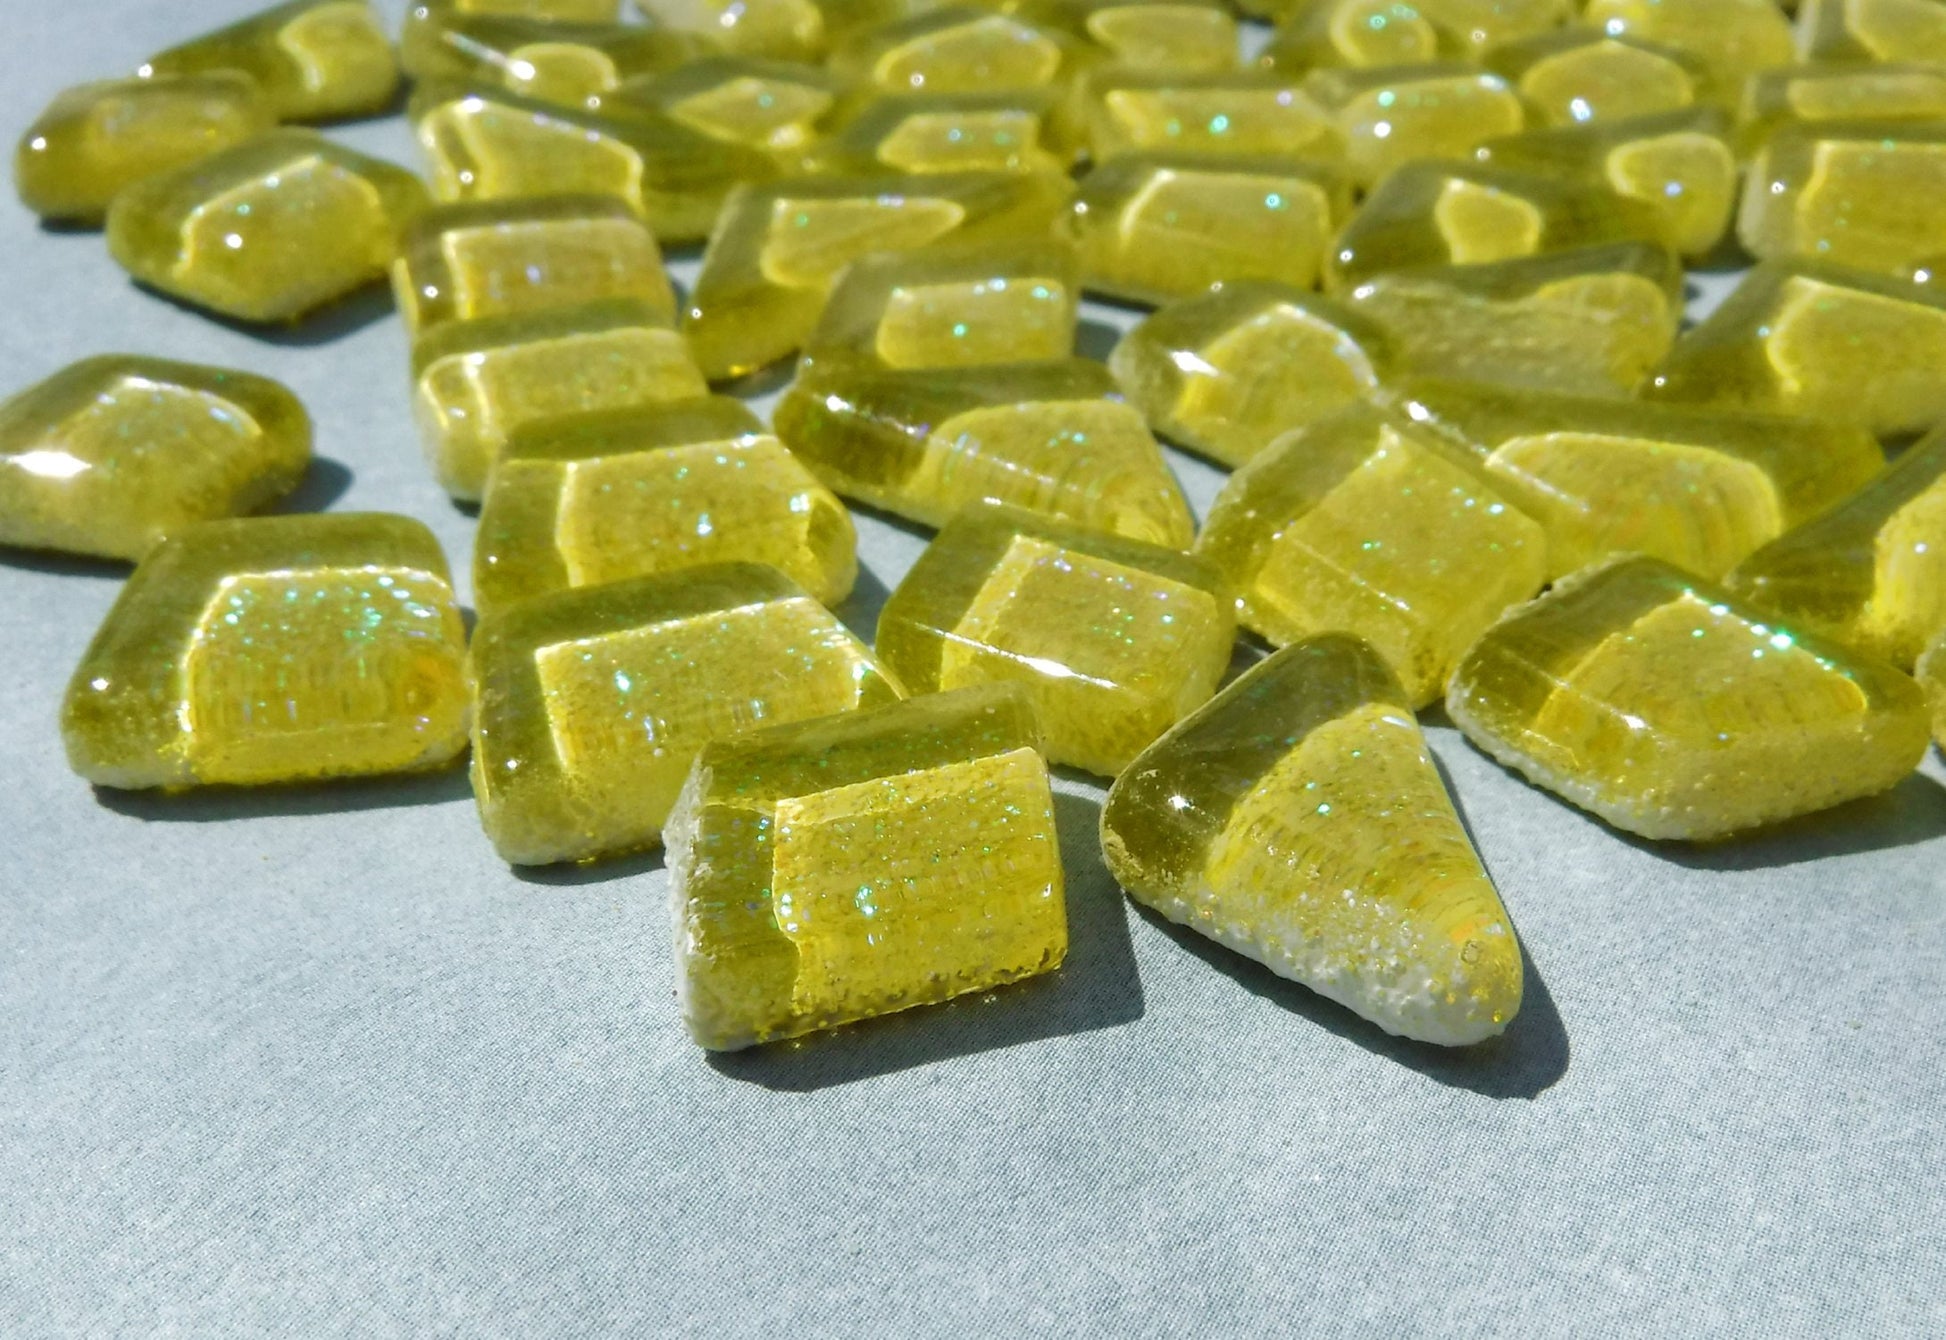 Yellow Glitter Puzzle Tiles - 100 grams in Assorted Shapes Glass Mosaic Tiles - Approx 45 Tiles